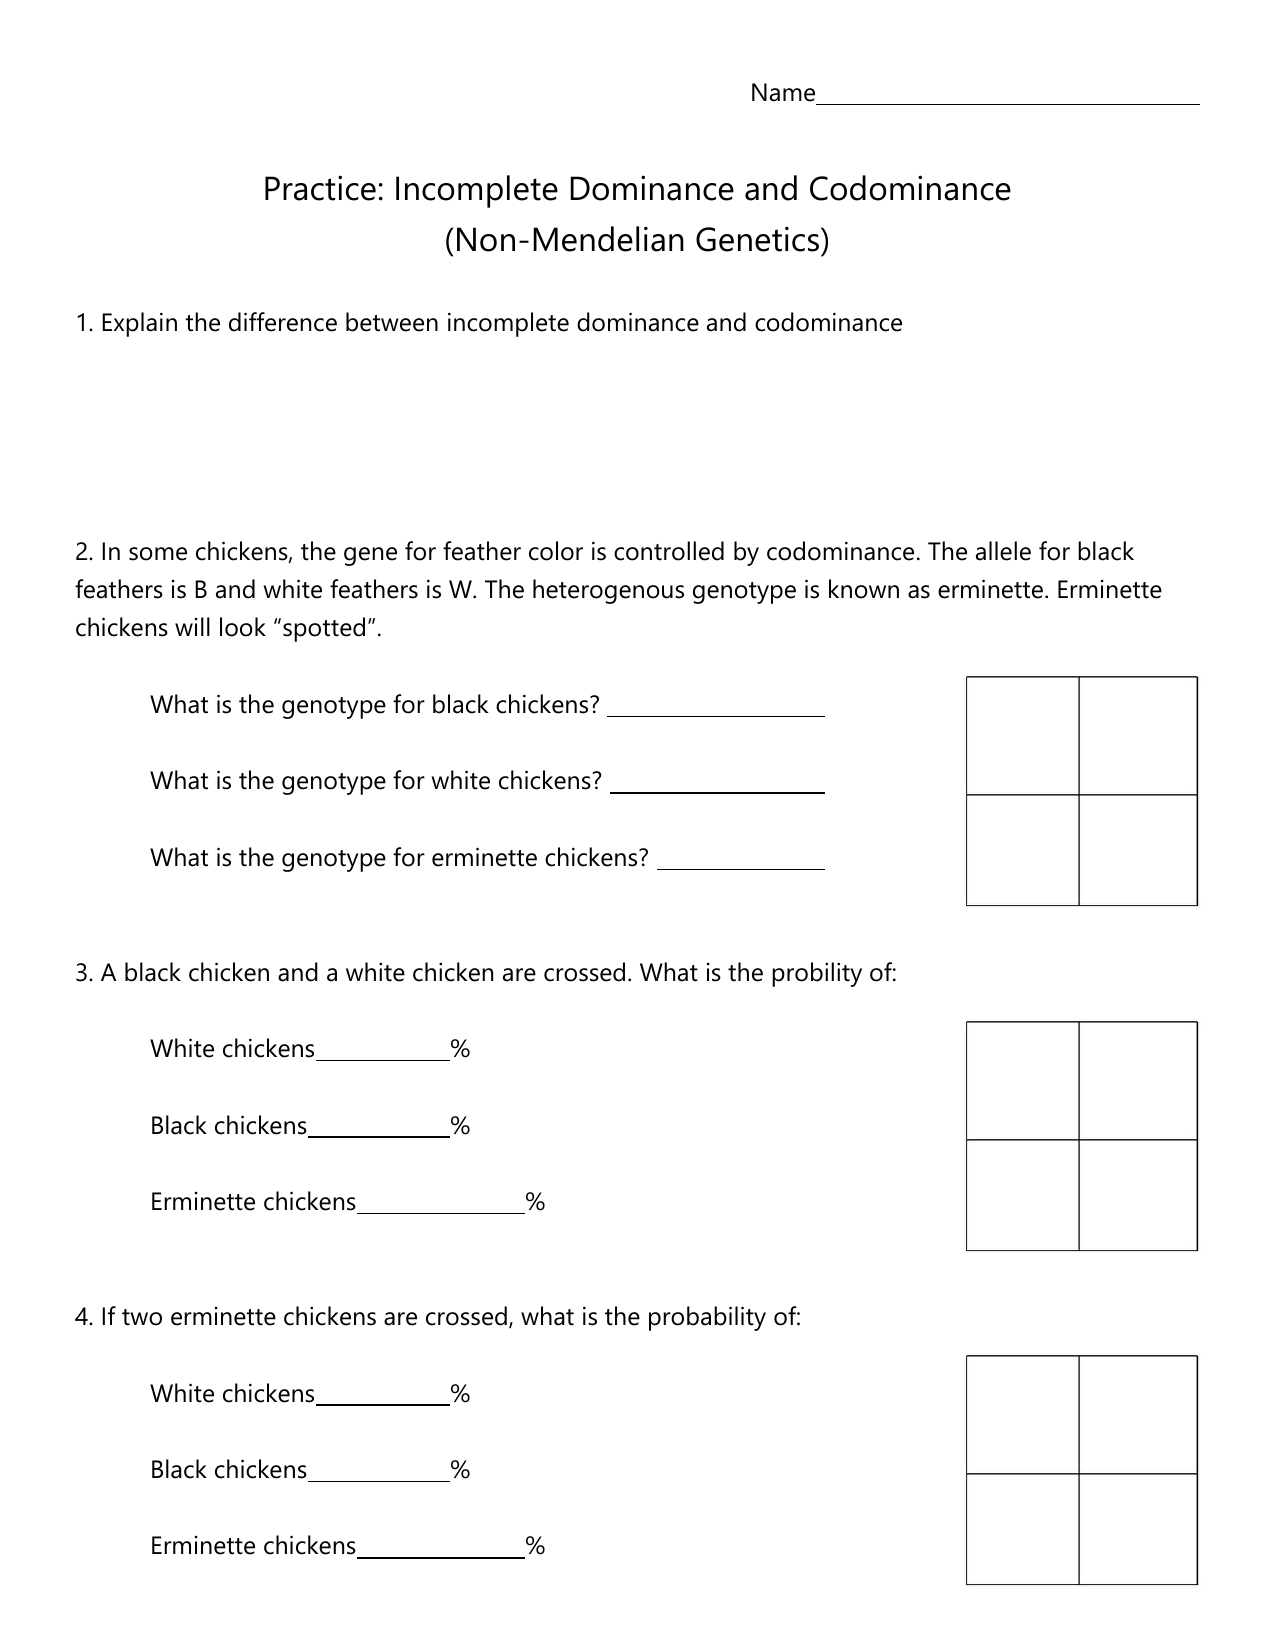 Practice: Incomplete Dominance and Codominance (Non For Mendelian Genetics Worksheet Answers